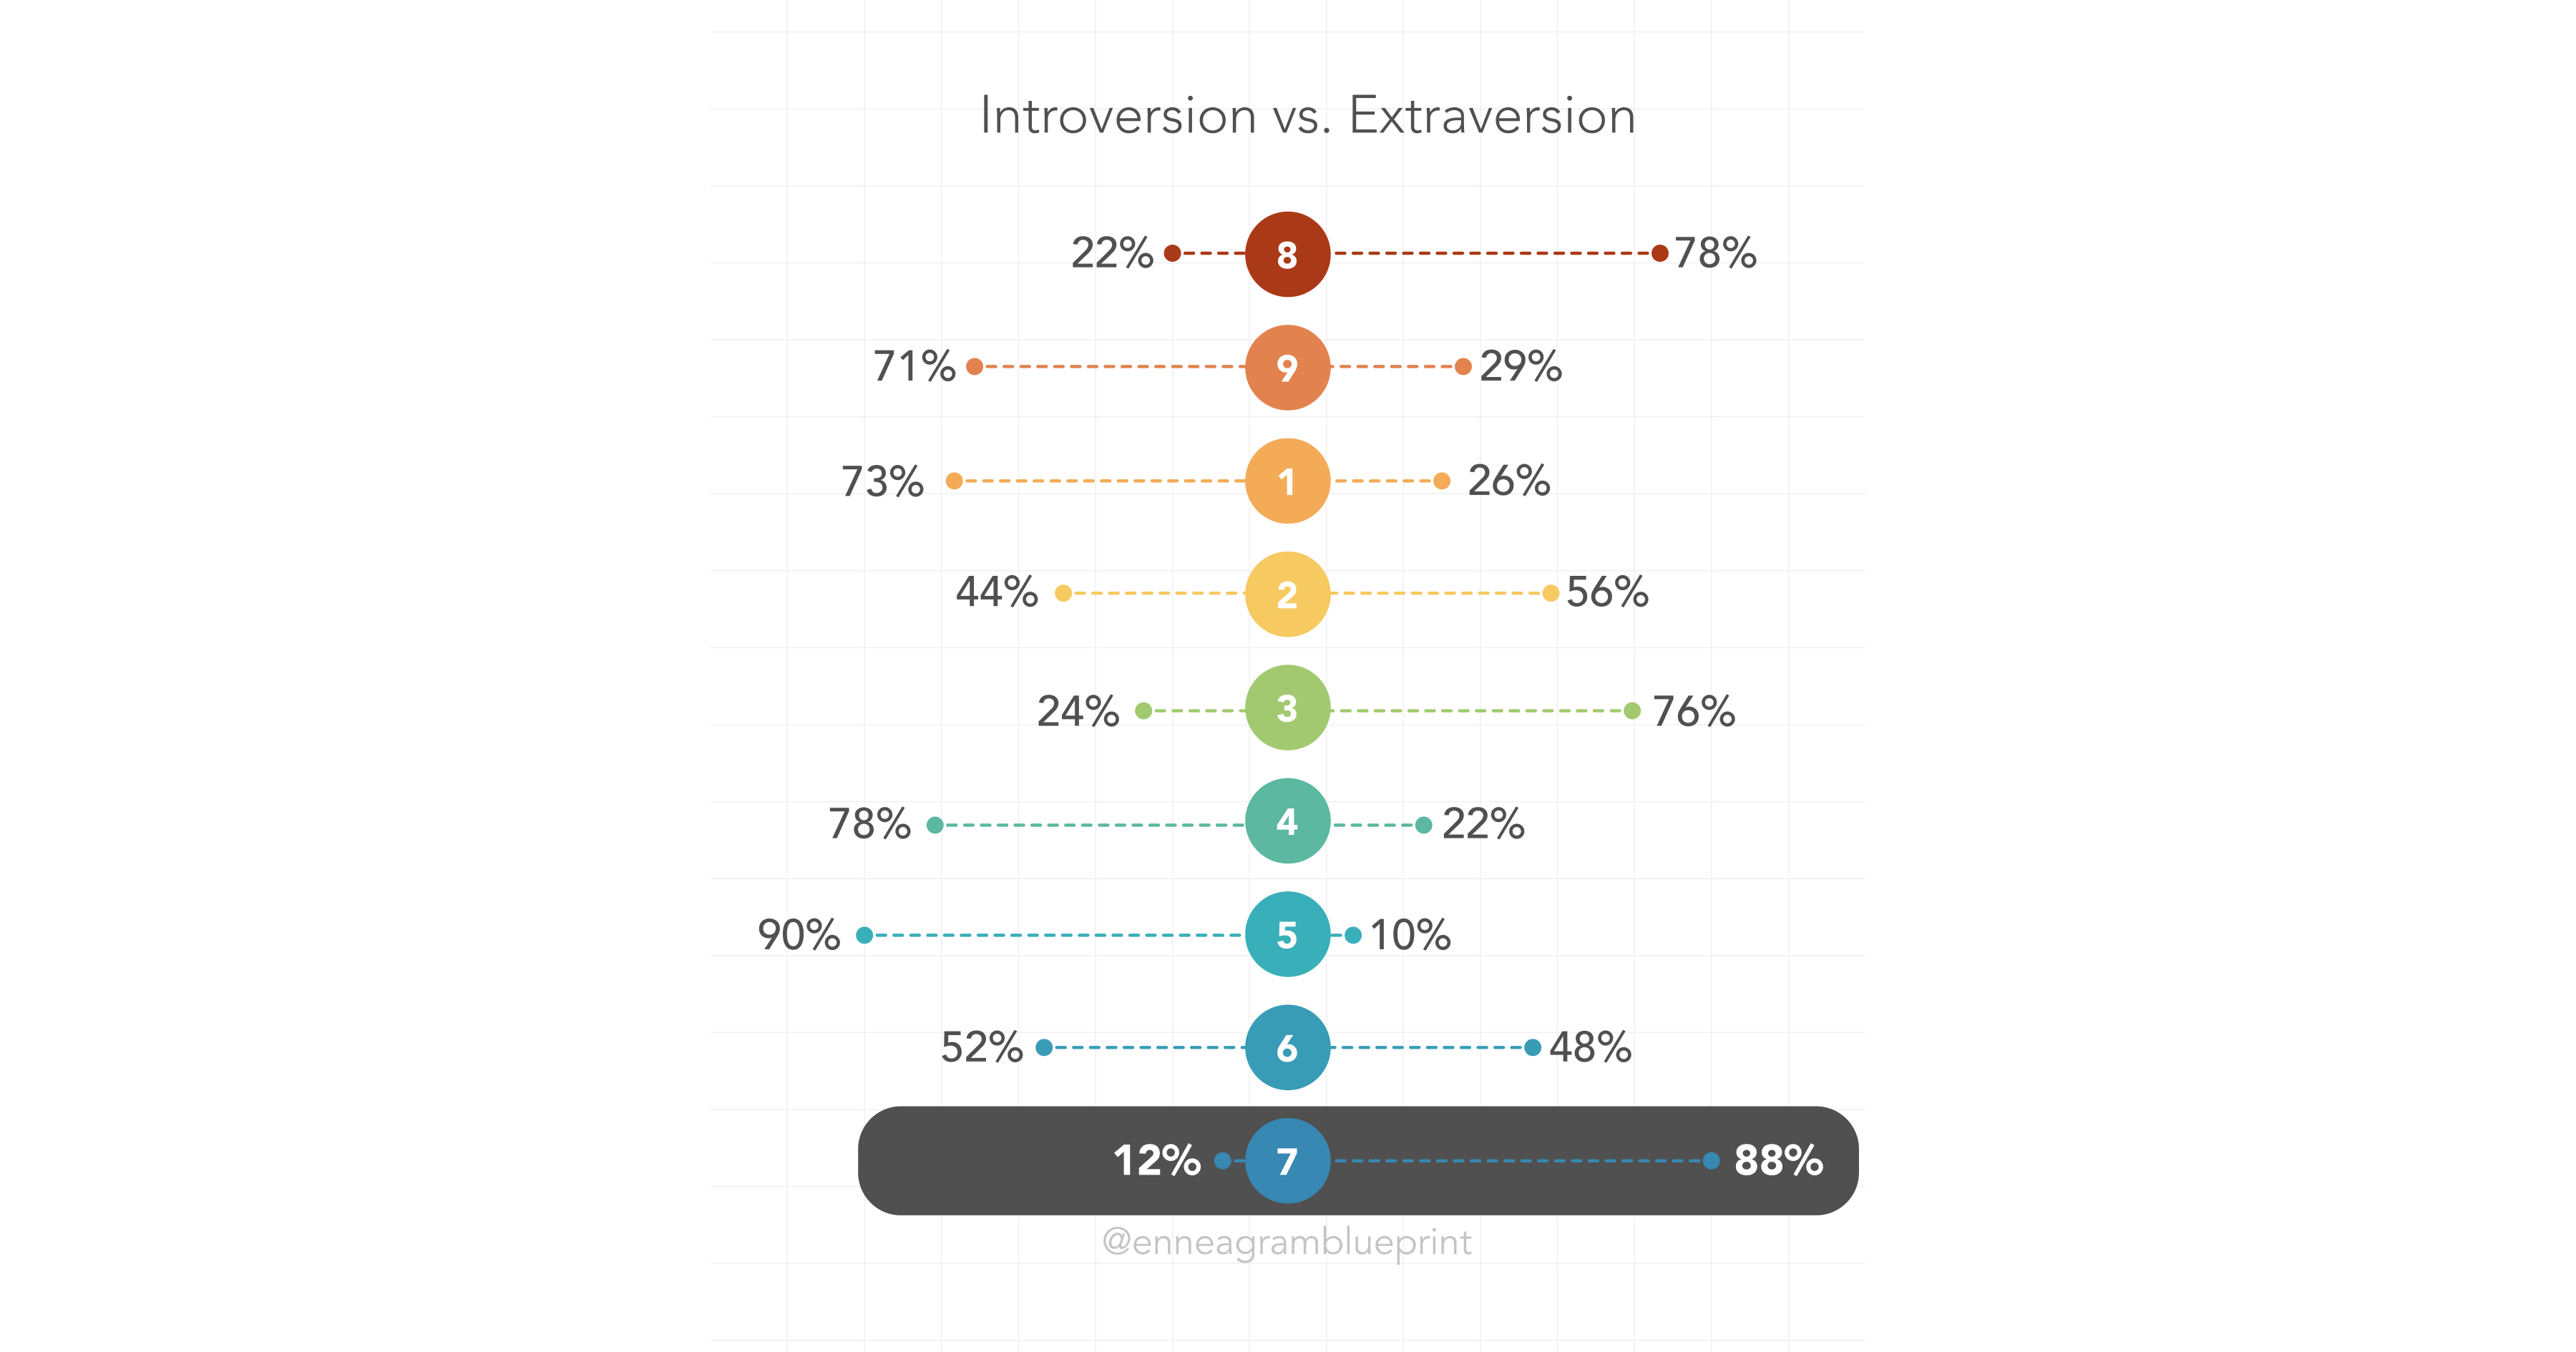 Chart comparing introversion/extraversion ratios for different Enneagram types. Type 8: 22% introverts, 78% extraverts. Type 9: 71% introverts, 29% extraverts. Type 1: 73% introverts, 26% extraverts. Type 2: 44% introverts, 56% extraverts. Type 3: 24% introverts, 76% extraverts. Type 4: 78% introverts, 22% extraverts. Type 5: 90% introverts, 10% extraverts. Type 6: 52% introverts, 48% extraverts. Type 7: 12% introverts, 88% extraverts.